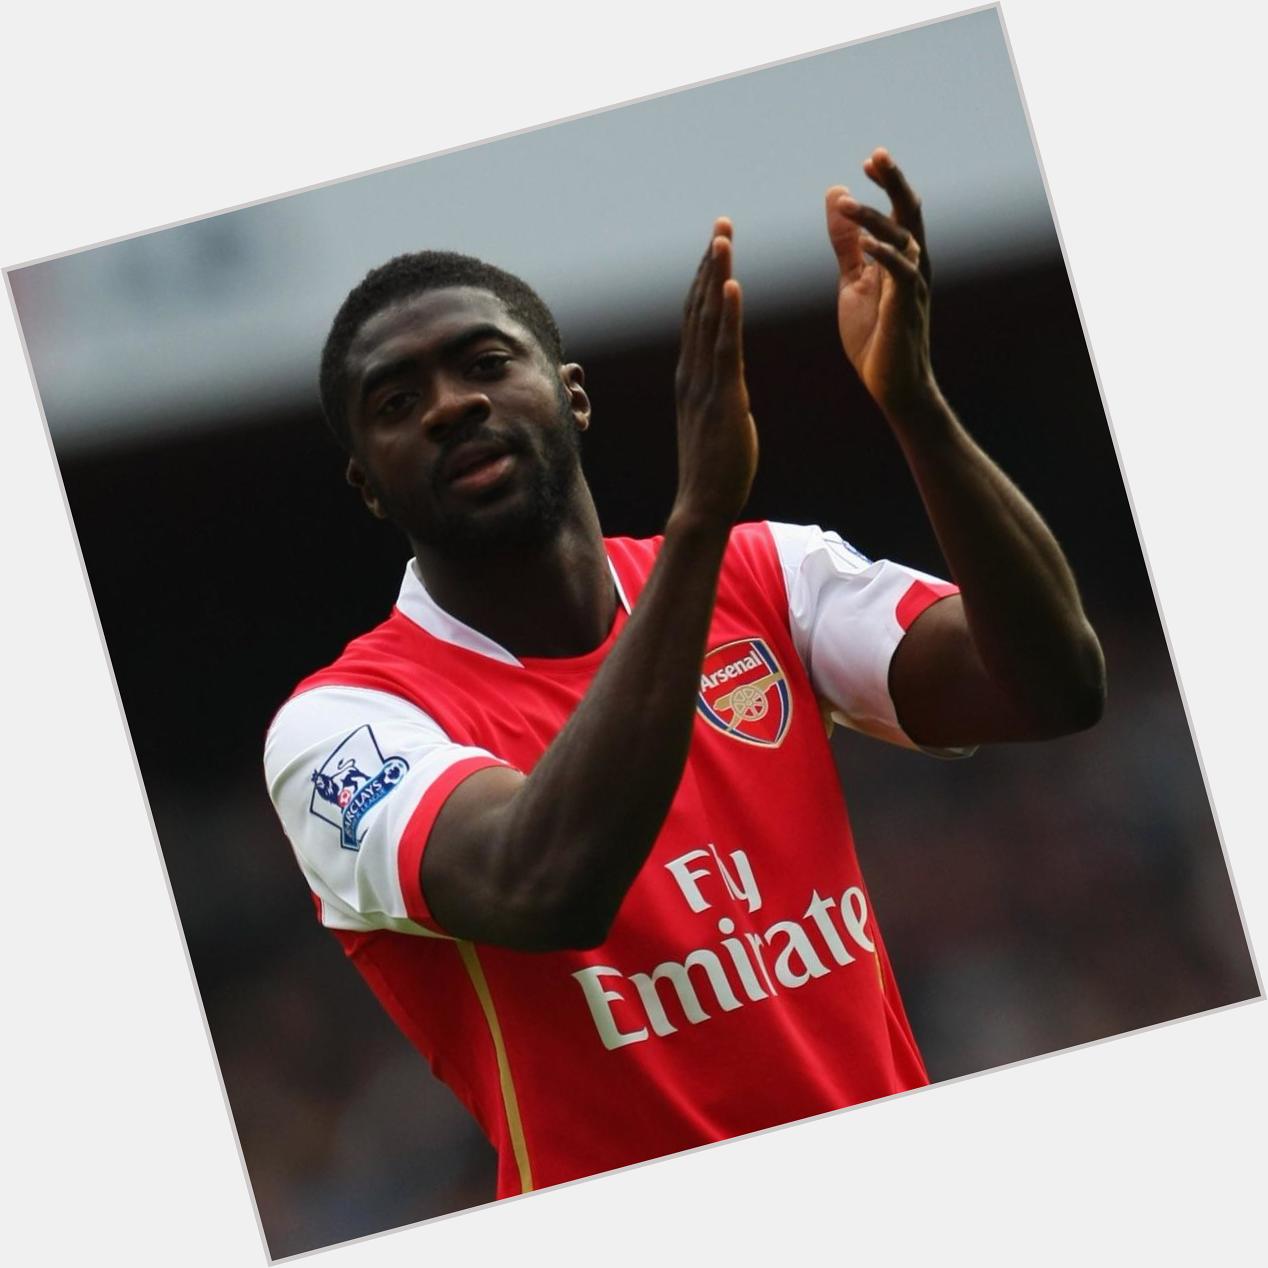 Happy birthday to kolo toure arsenal legend and a legend from Africa 
Have a wonderful day 